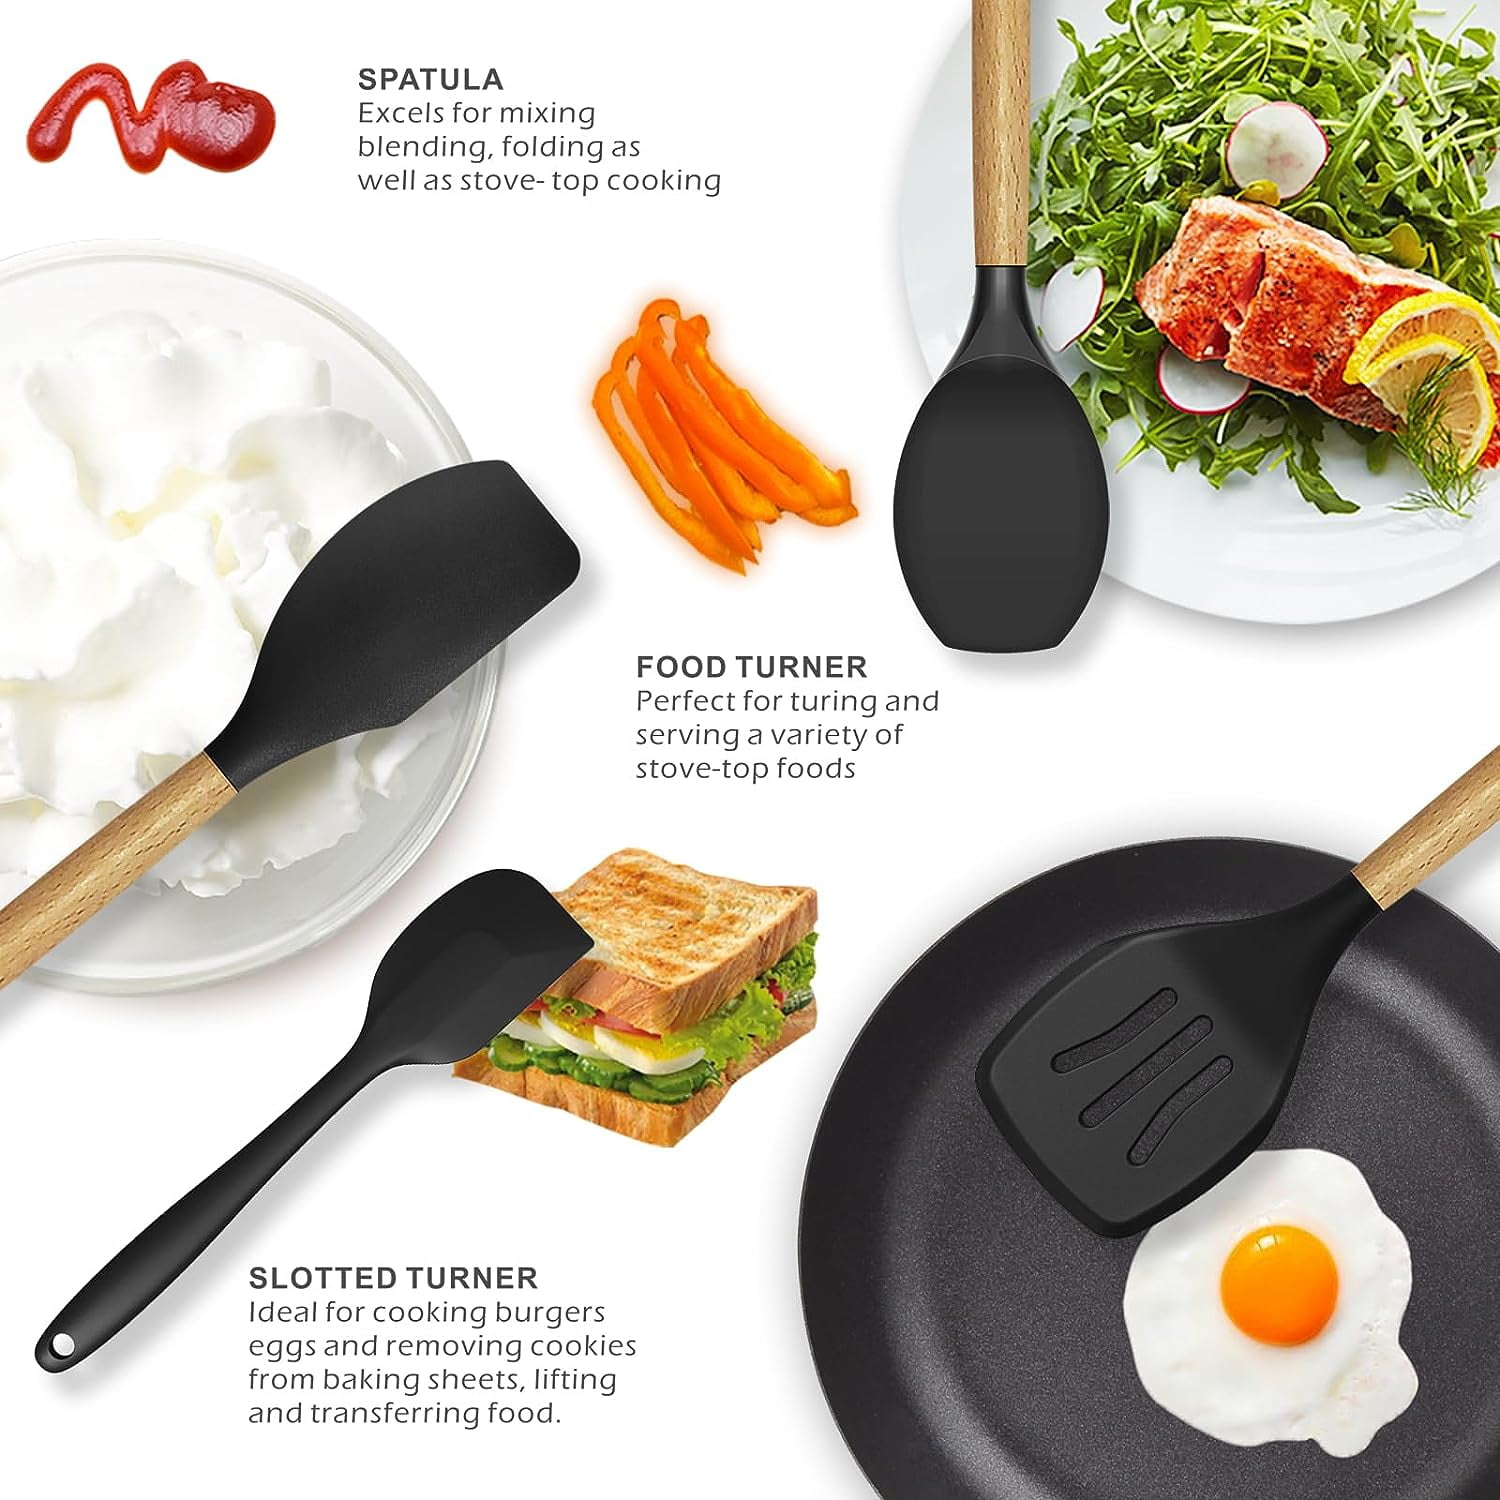 Silicone Cooking Utensils Set - Silicone Kitchen Utensils for Cooking  Wooden Handles, 446°F Heat Res…See more Silicone Cooking Utensils Set -  Silicone